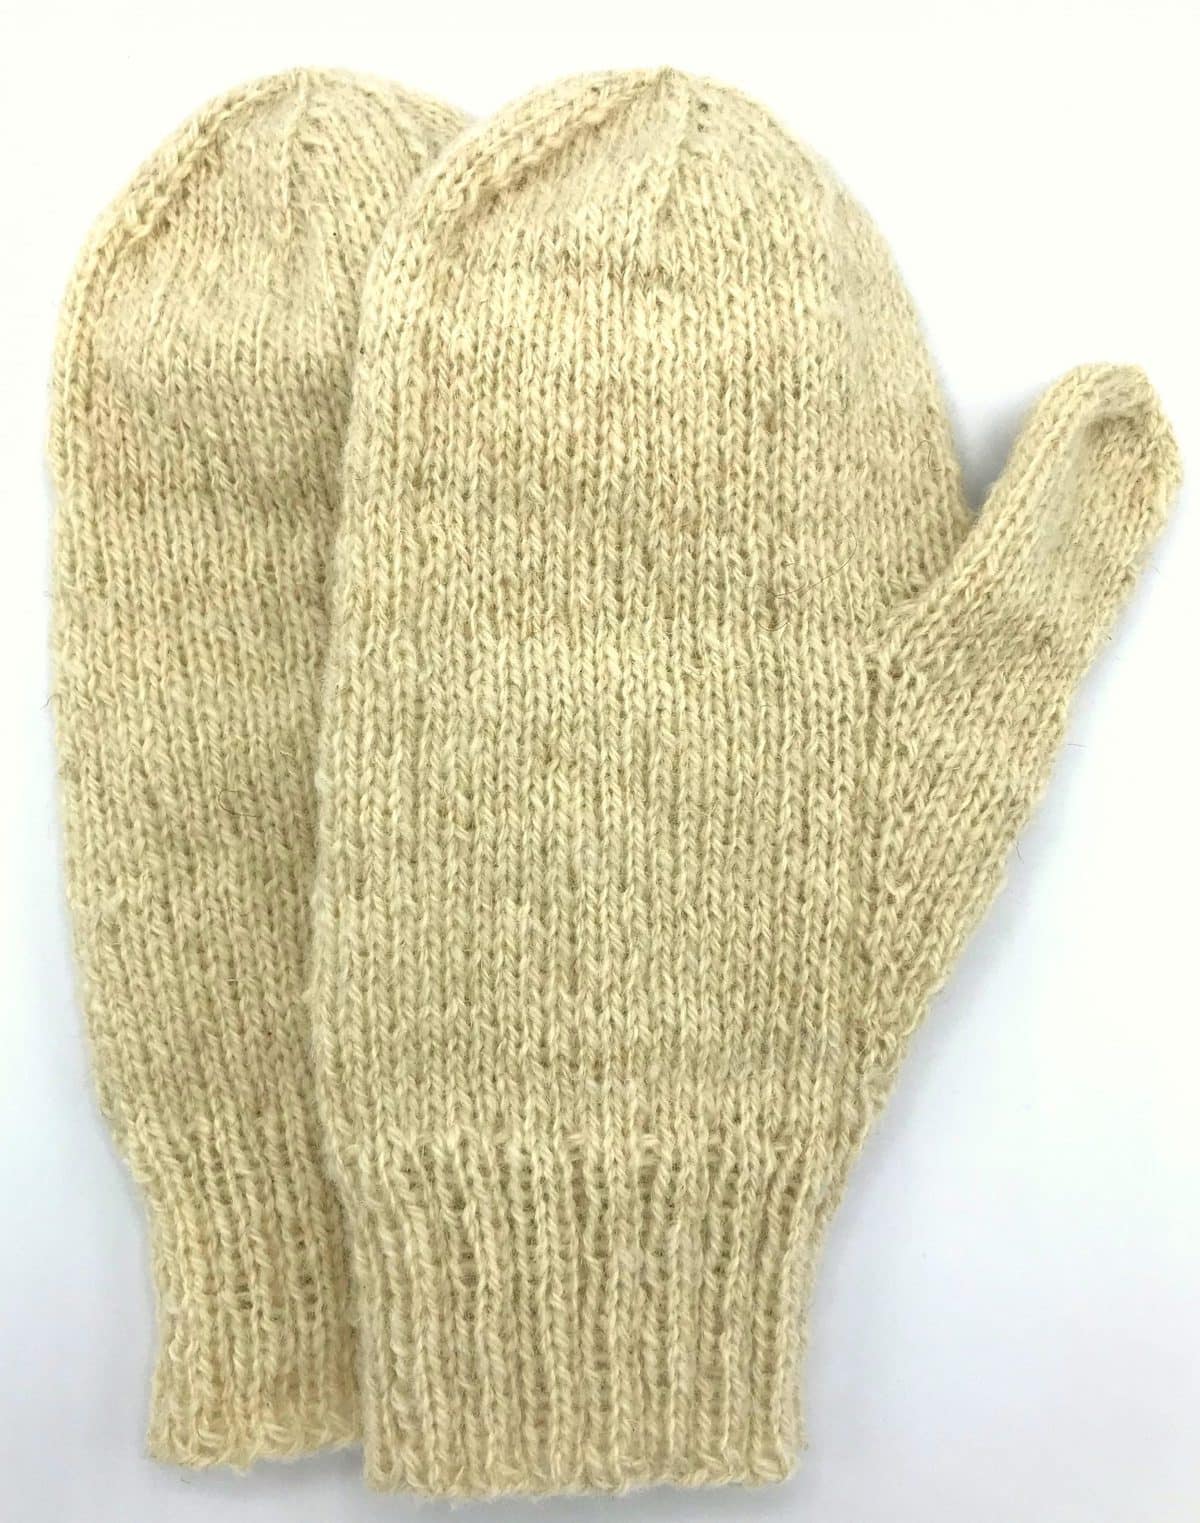 image description: a pair of handknit mittens worked in off-white wool, oversized and somewhat loosely knit, ready for felting